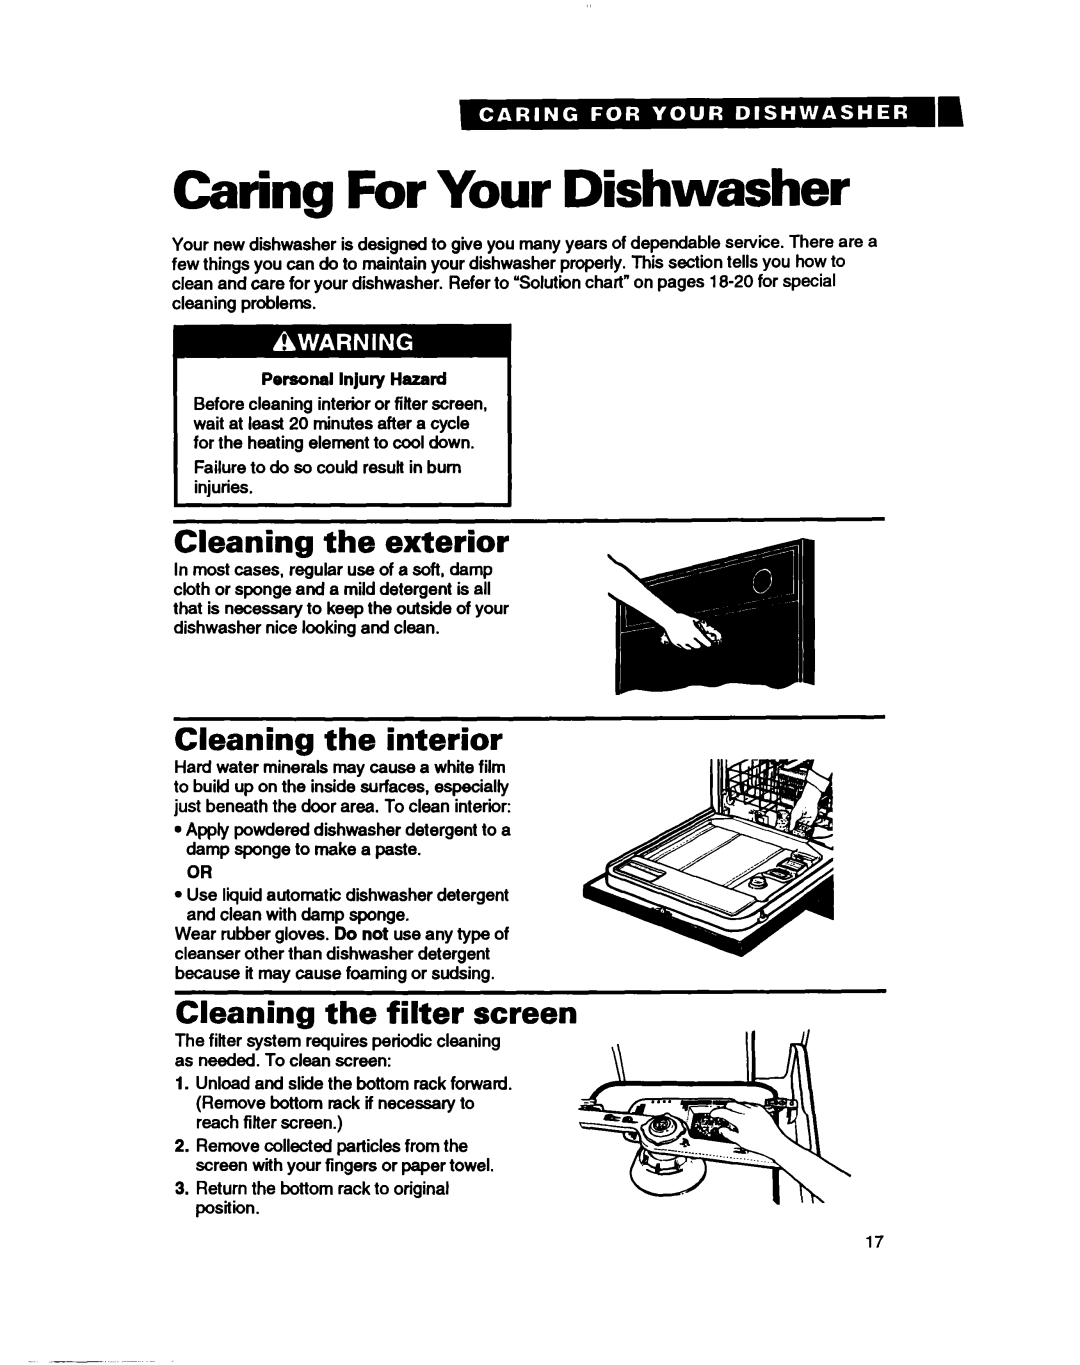 Whirlpool DU8400 Caring For Your Dishwasher, Cleaning the exterior, Cleaning the interior, Cleaning the filter screen 